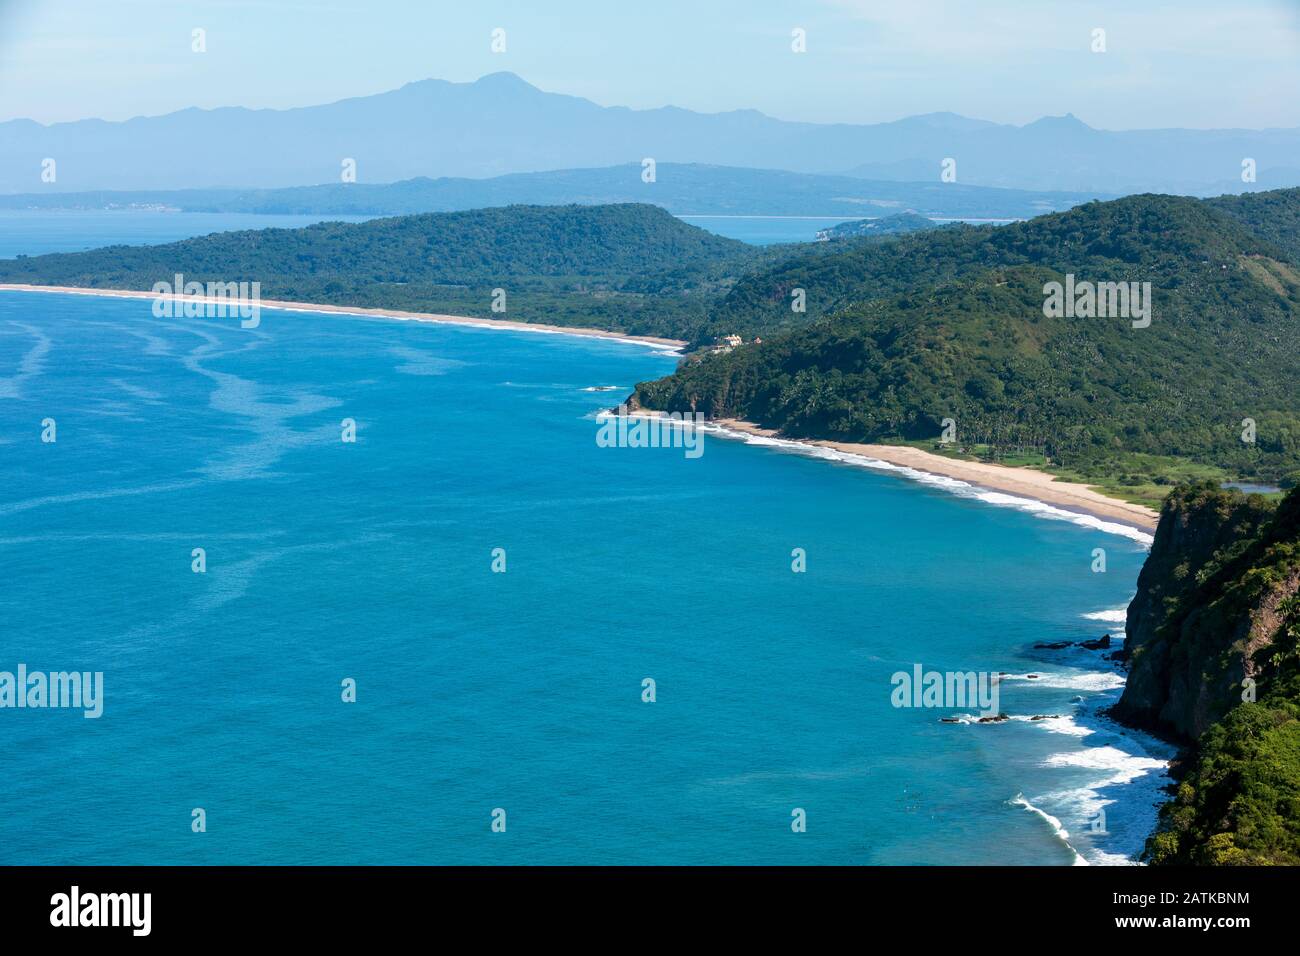 Mexico, Los de Marcos, Nayarit, The view of the Mexican coast from a promotory in Lo de Marcos Stock Photo